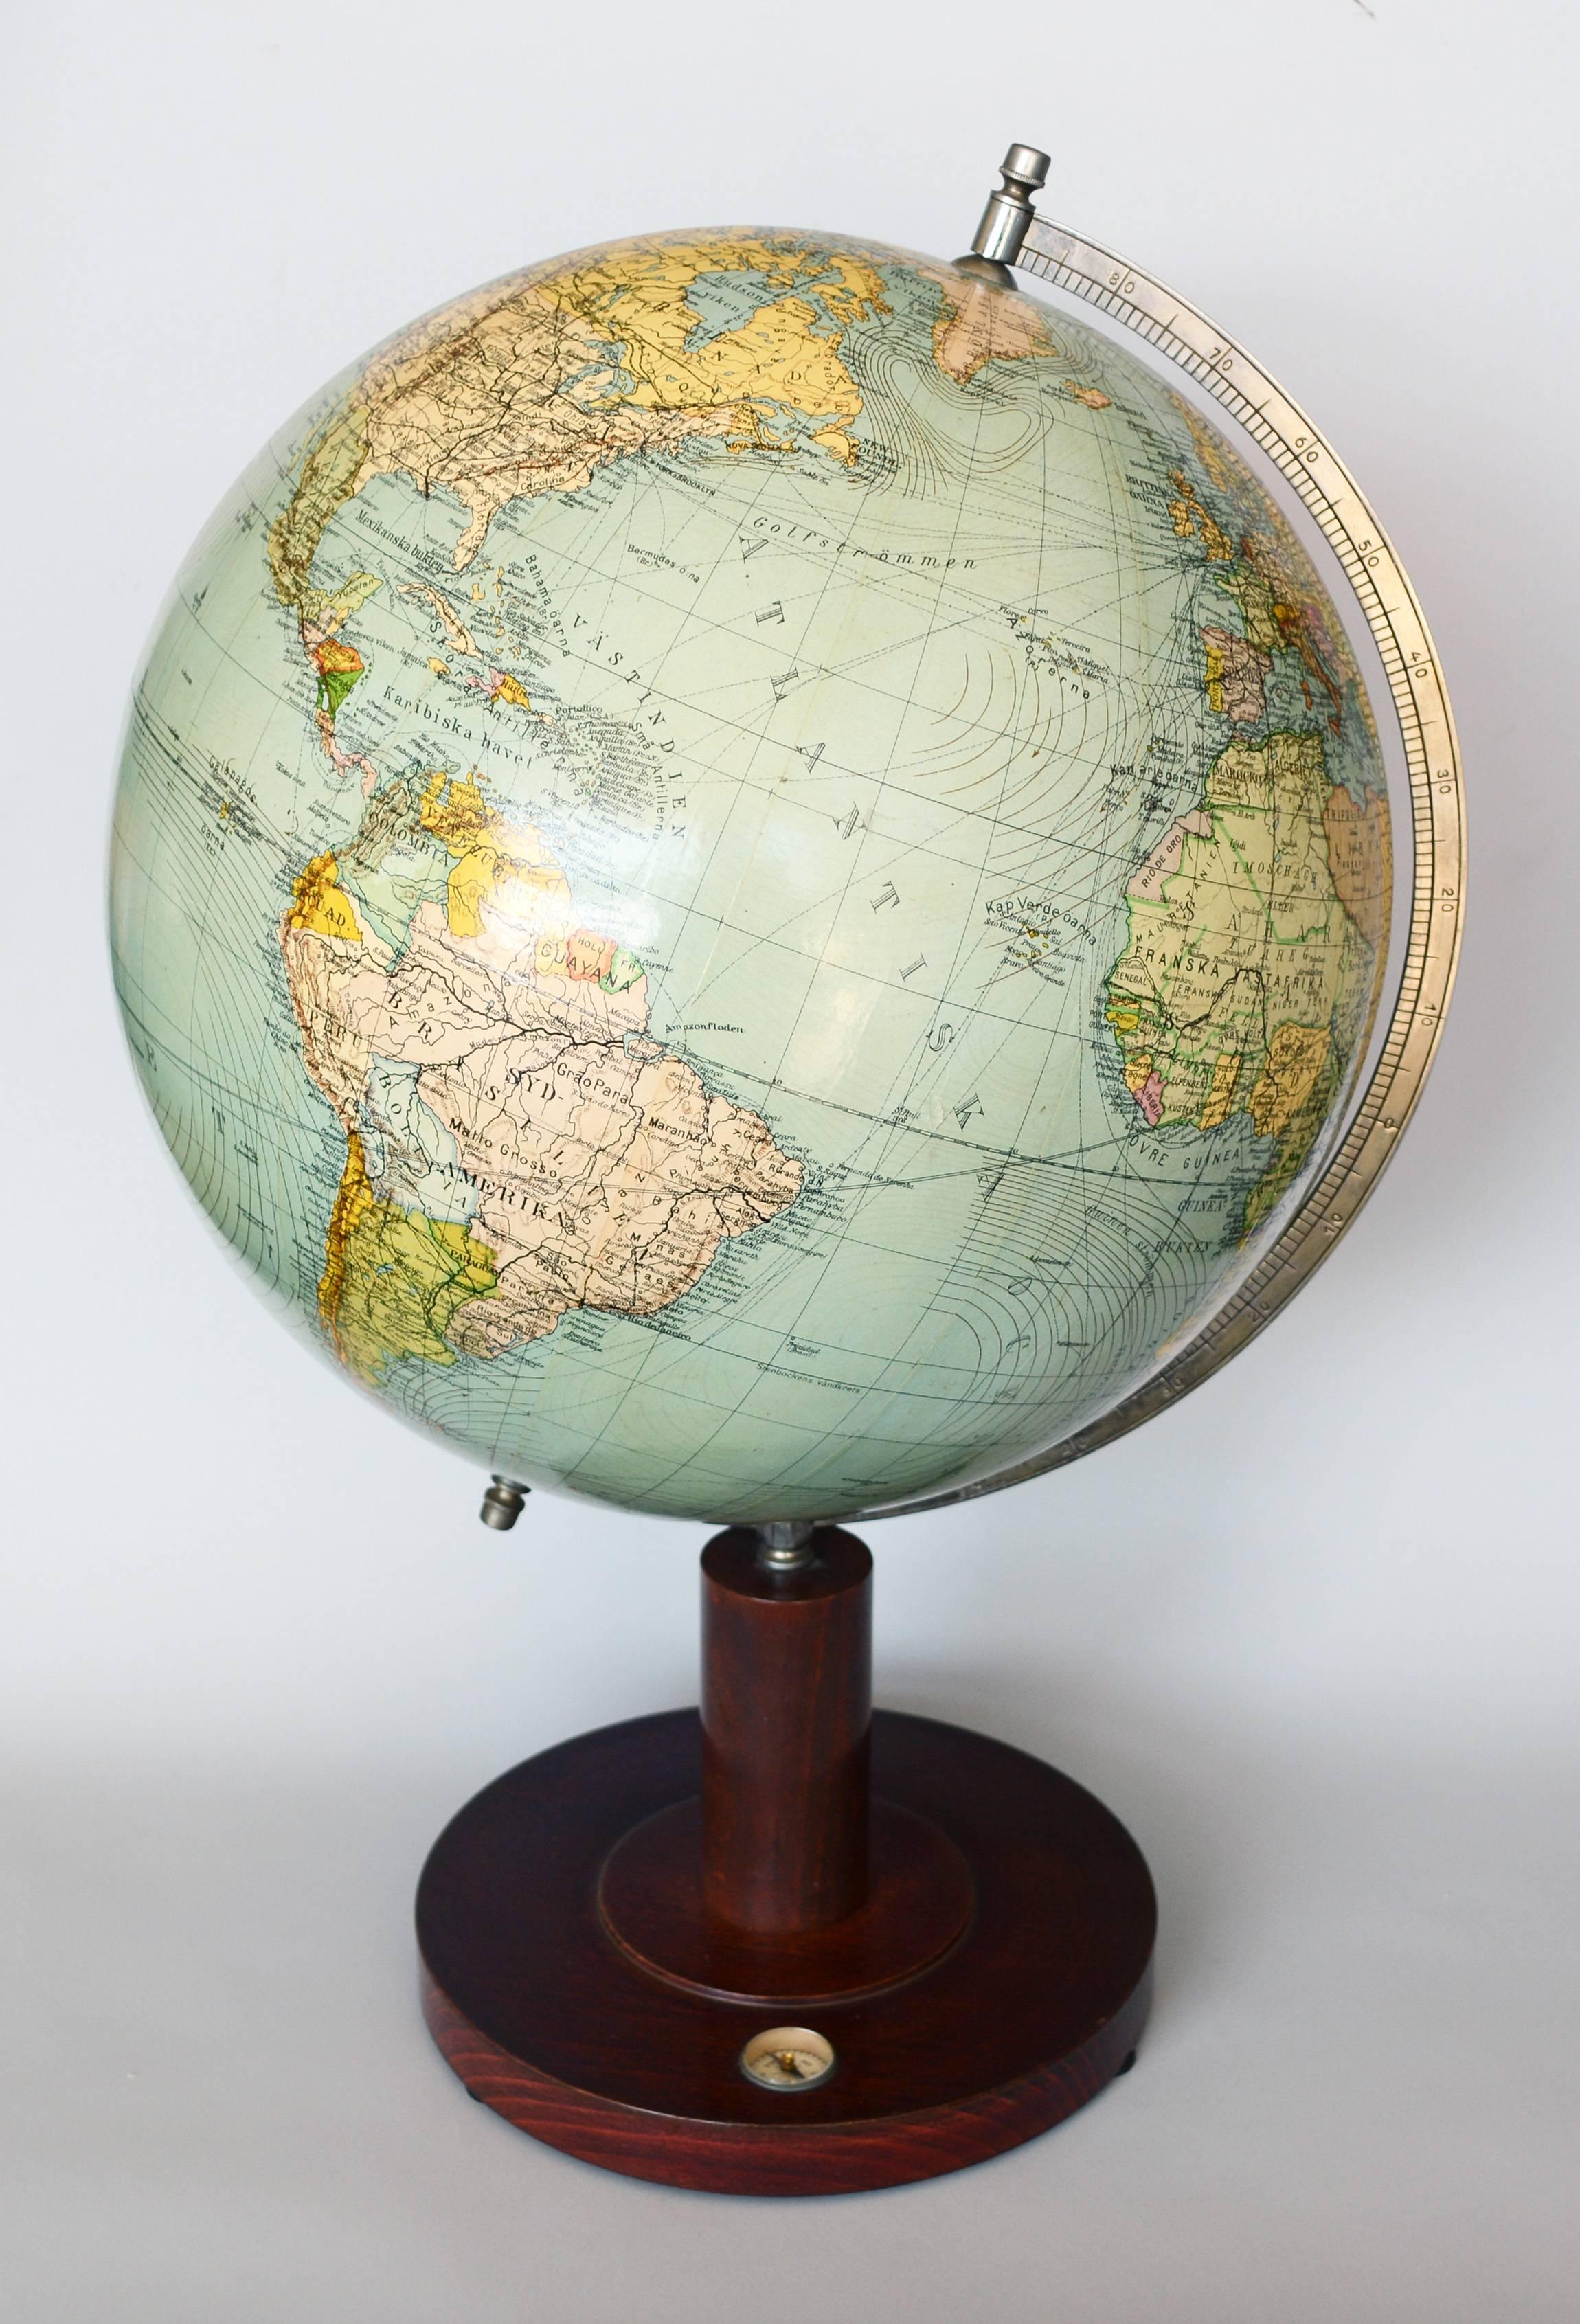 Vintage terrestrial globe by Columbus-Jordglob, Stockholm, Sweden. This globe shows French and Belgium territories in Africa. The wood base includes a small compass.